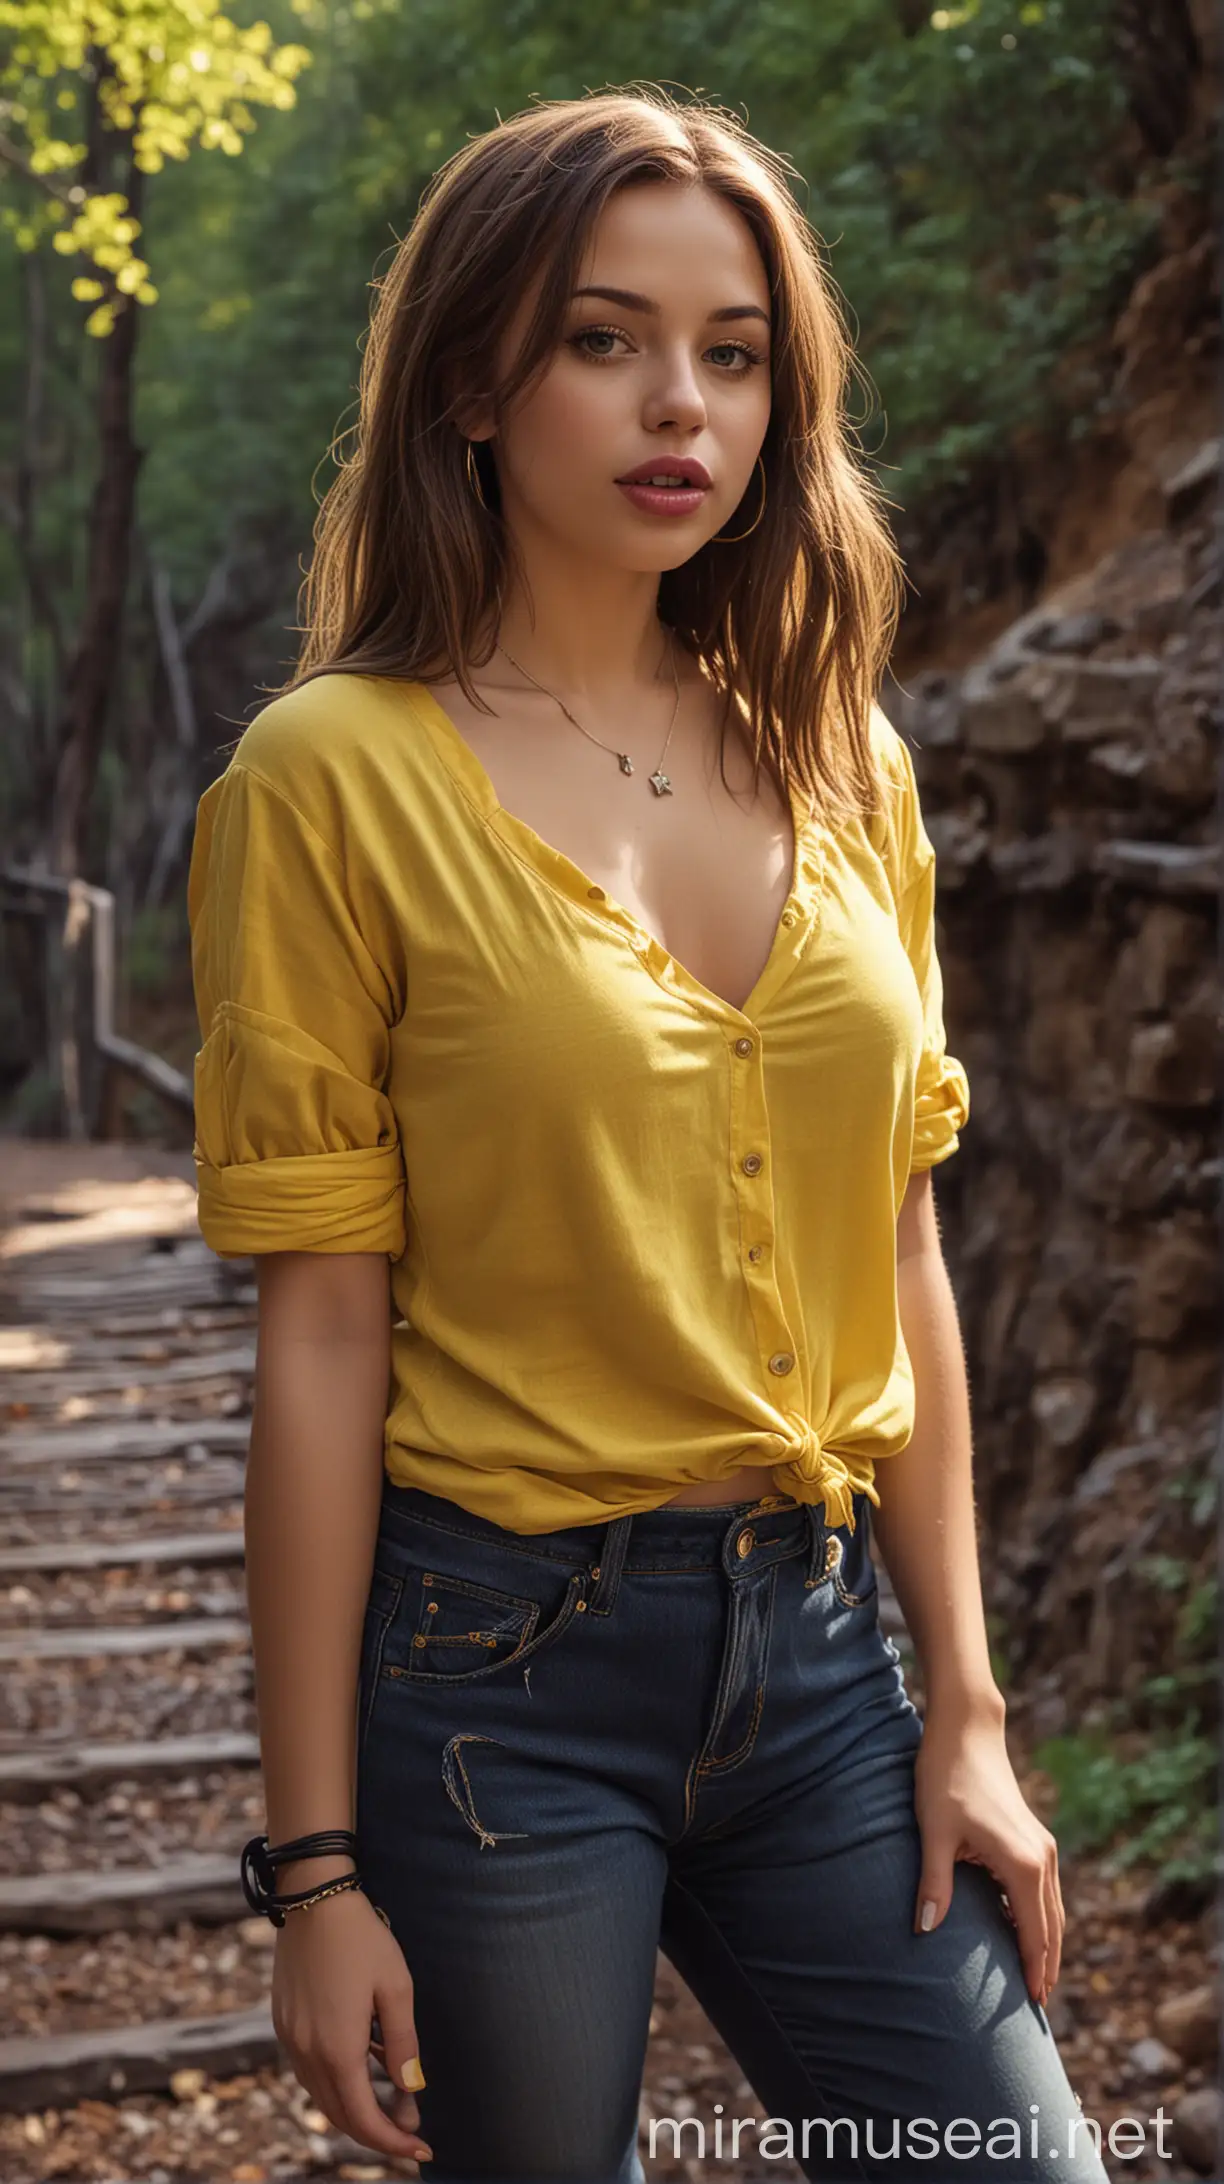 4k Ai art front view beautiful USA girl brown hair blue lipstick nose ring ear tops black jeans and yellow shirt and golden bra big saggy tits in usa gorge trail